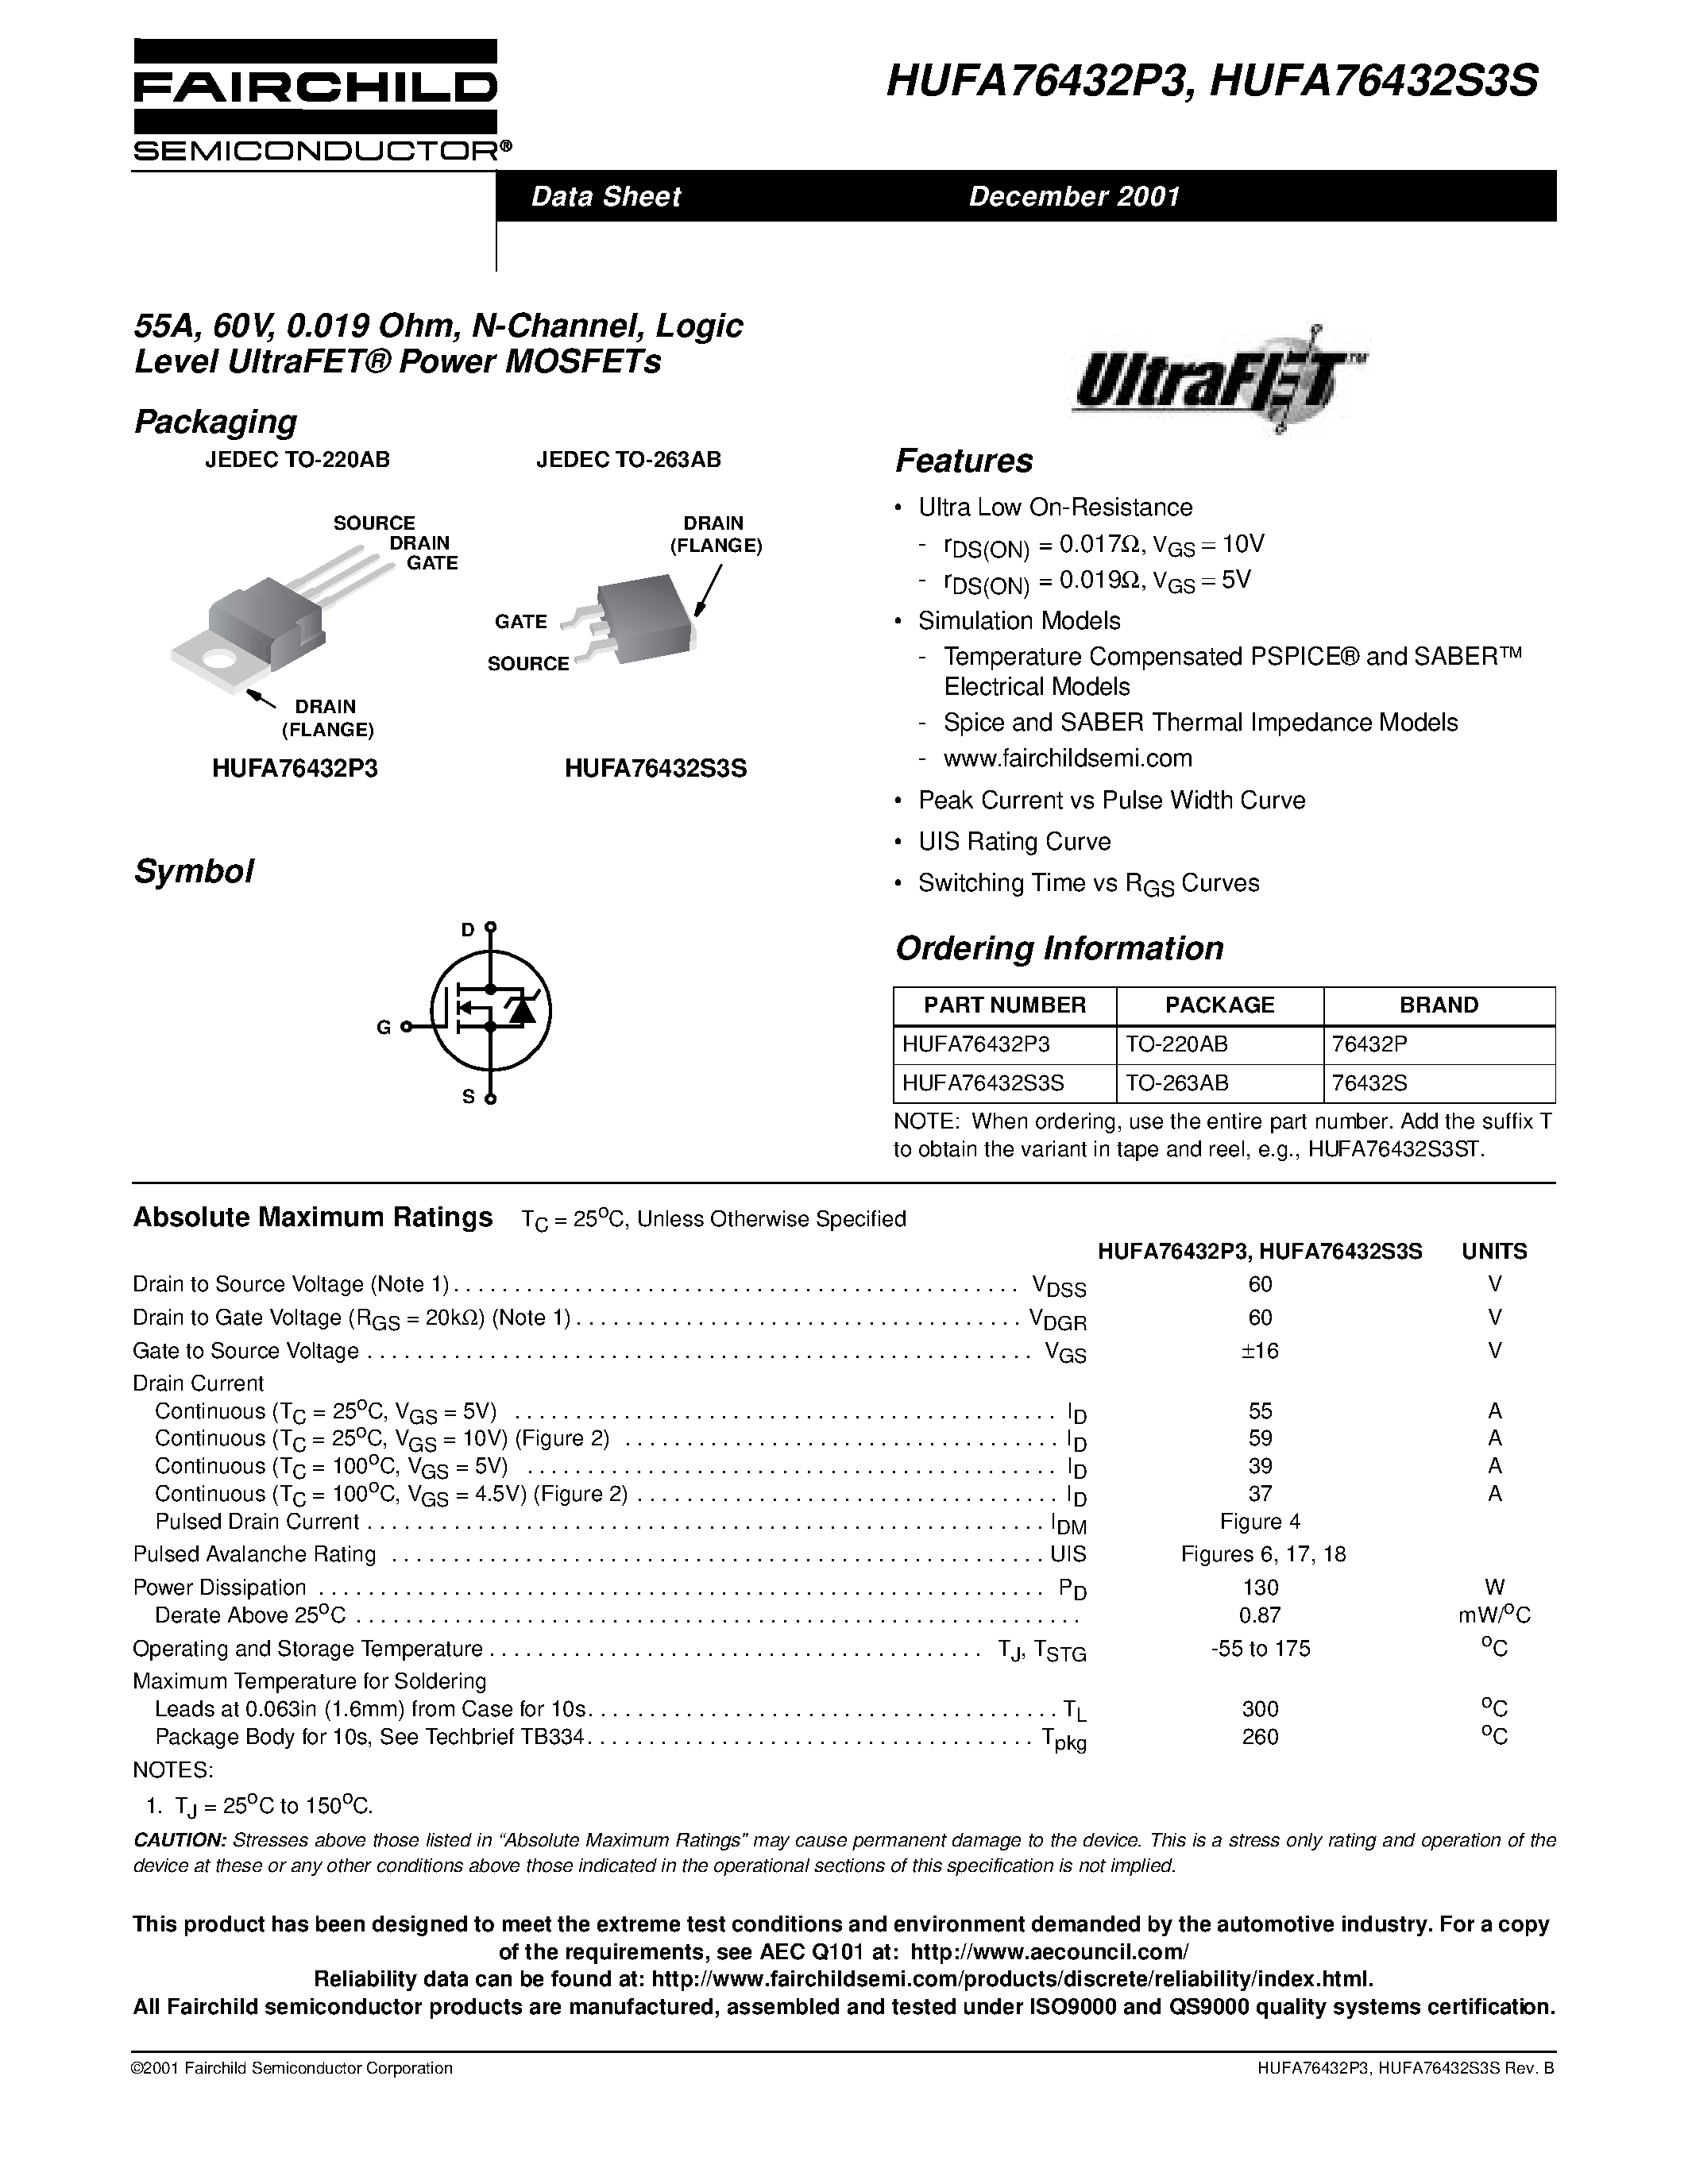 Datasheet HUFA76432P3 - 55A/ 60V/ 0.019 Ohm/ N-Channel/ Logic Level UltraFET Power MOSFETs page 1